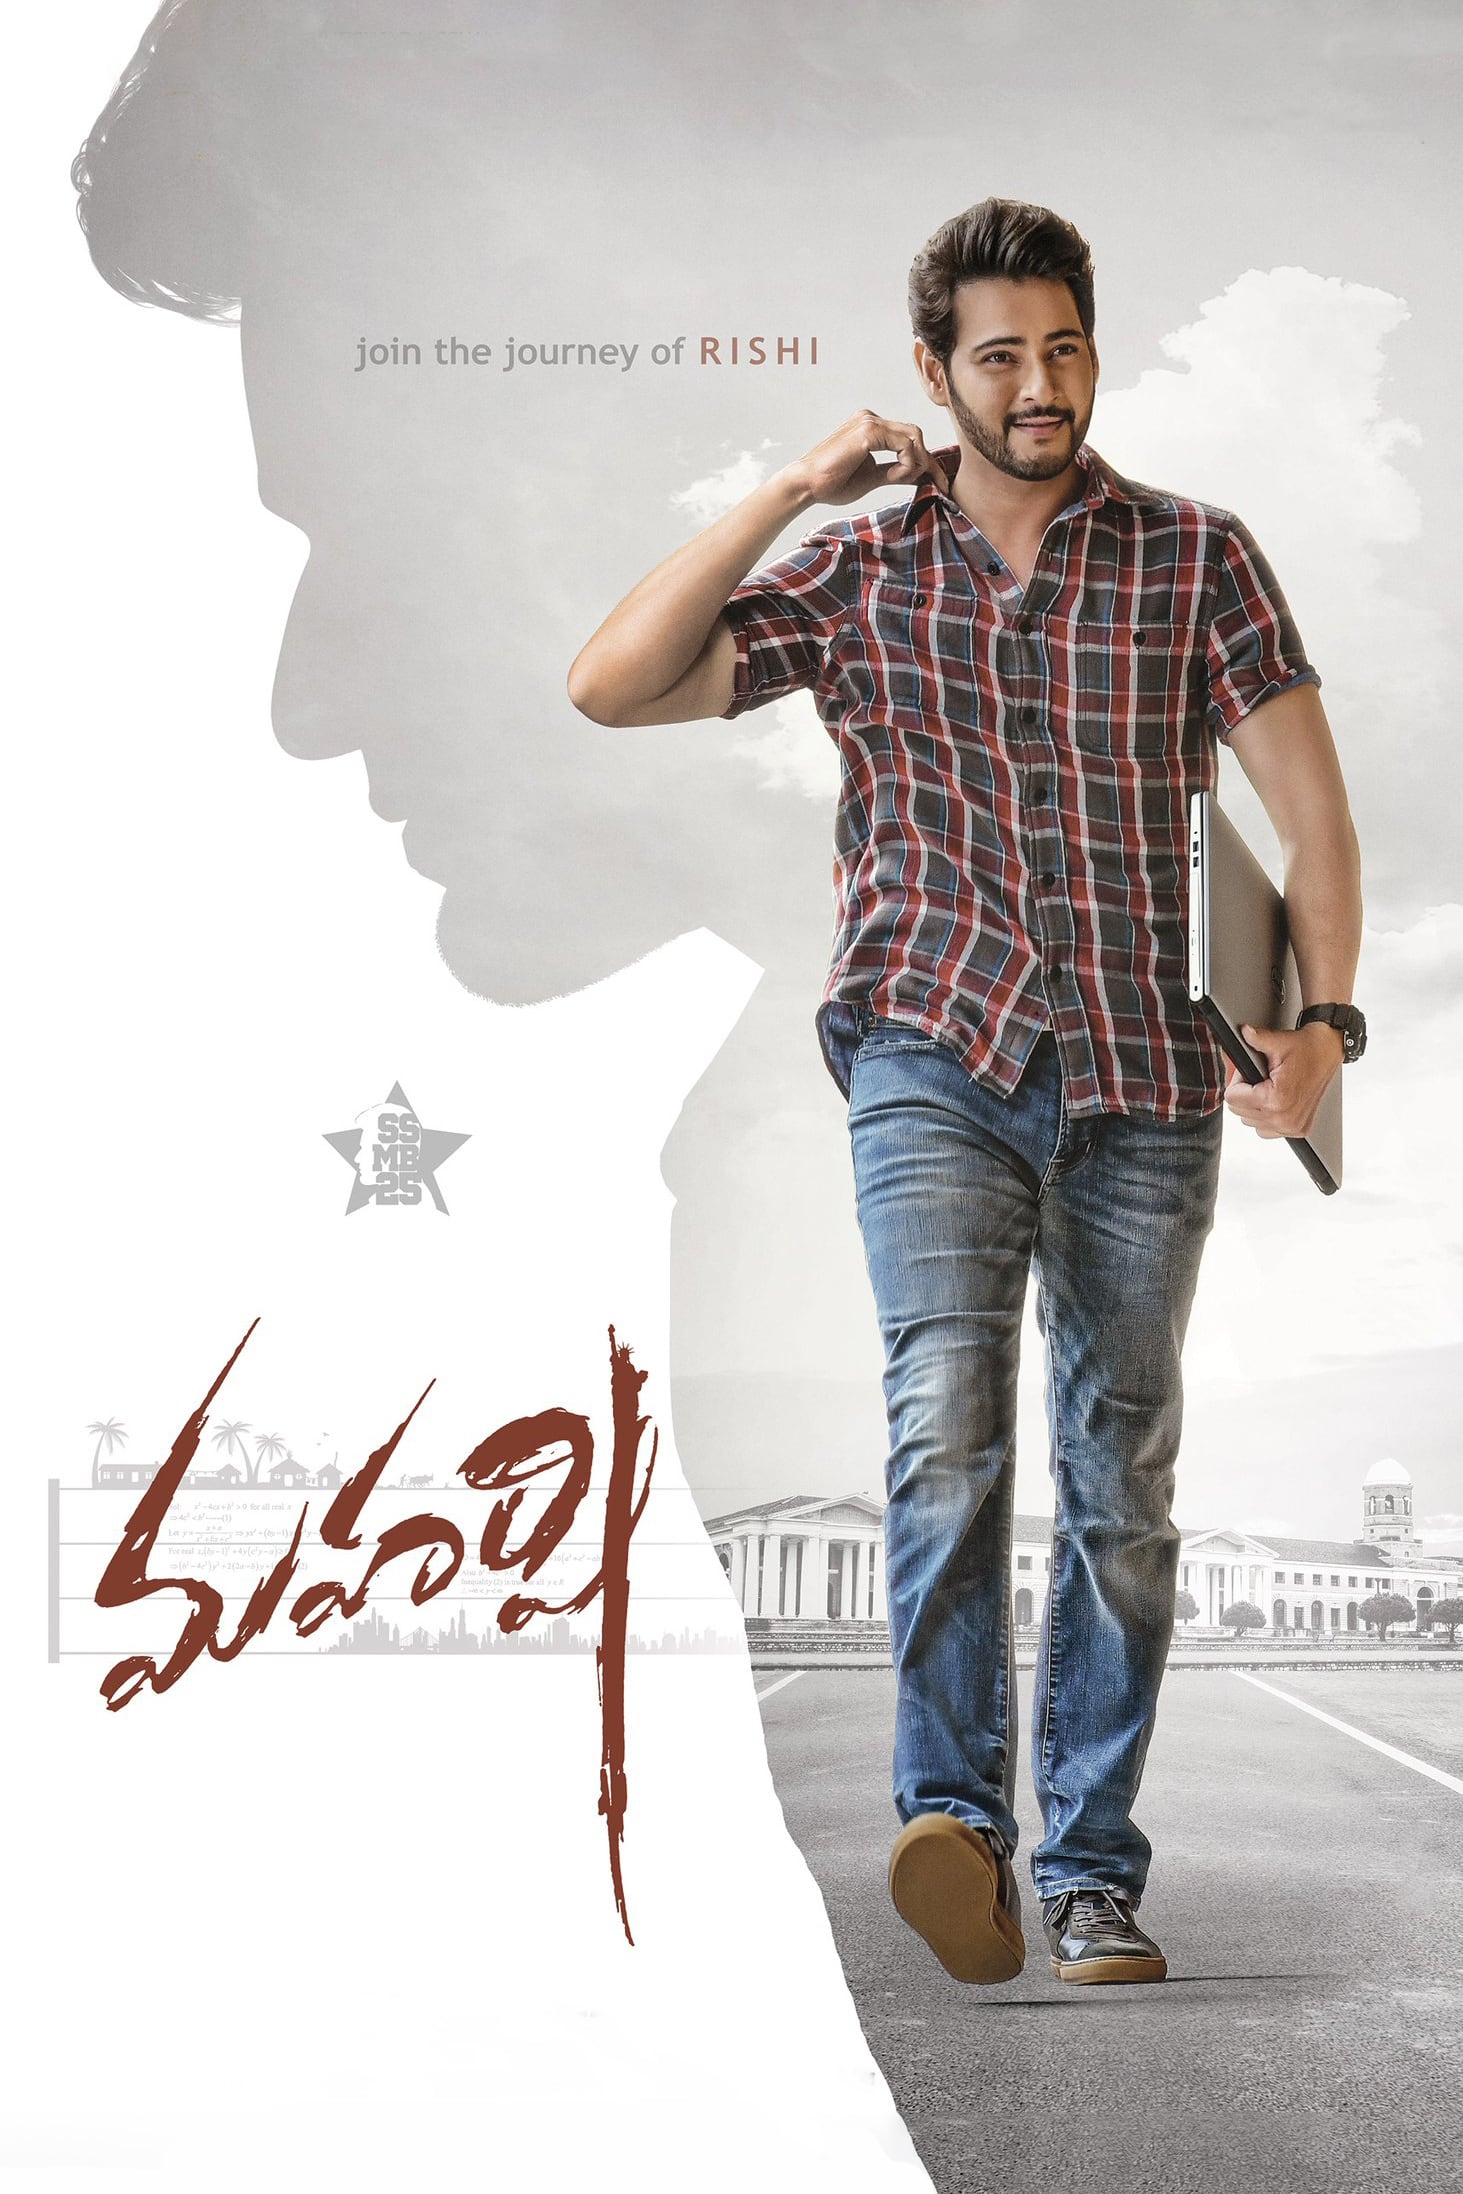 Poster for the movie "Maharshi"